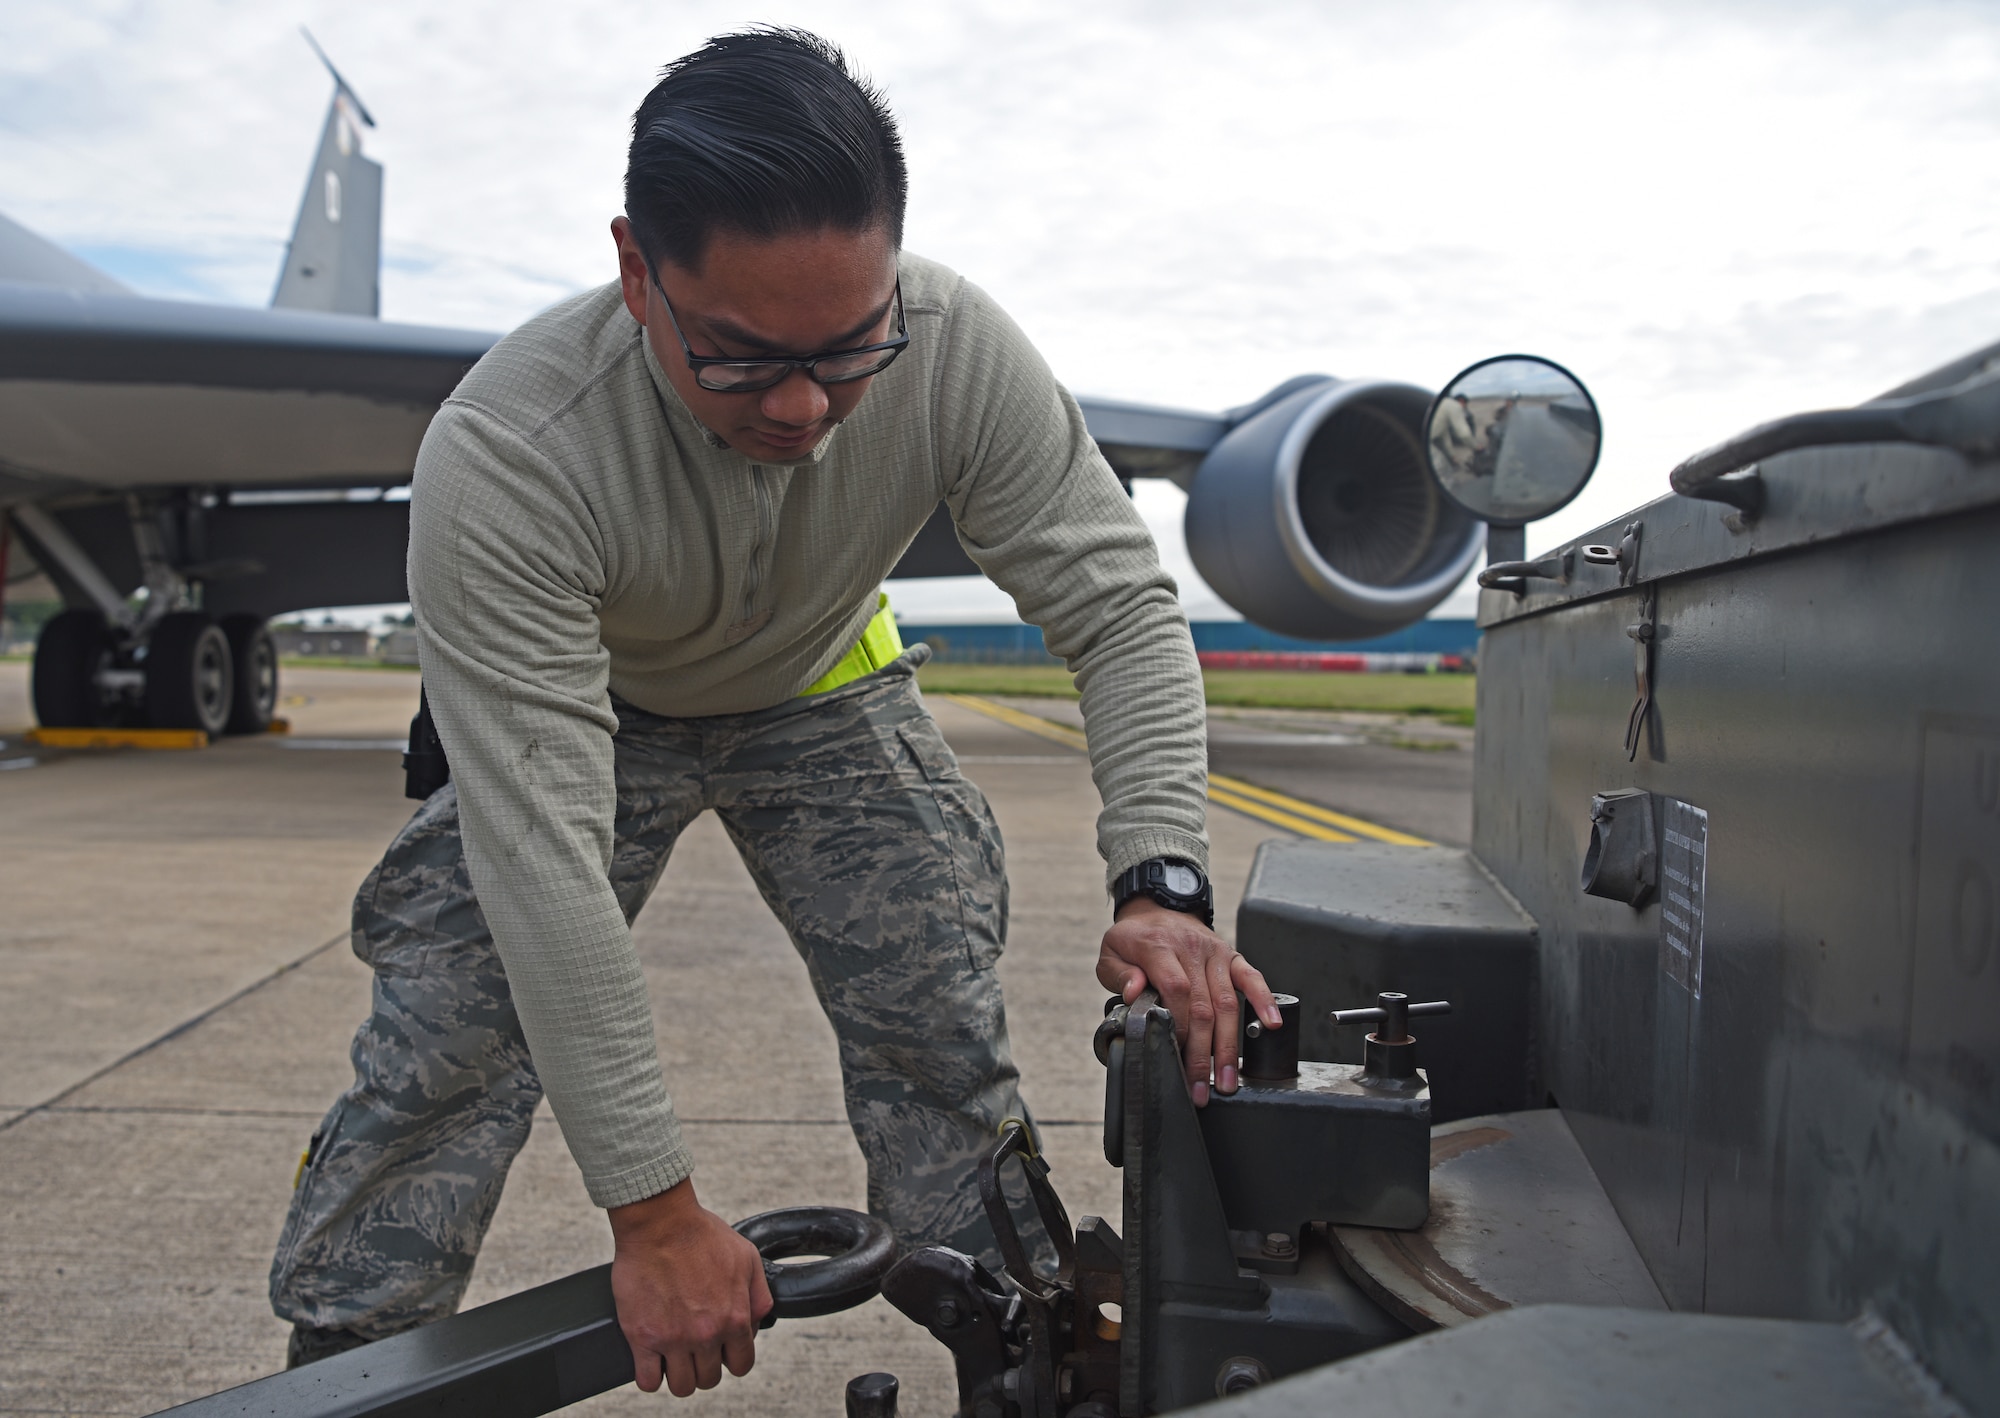 Airman 1st Class Marcus Macalinao, 100th Maintenance Squadron aerospace ground equipment technician, detaches a ground power unit at RAF Mildenhall, England, Oct. 23, 2019. AGE technicians support the Air Force mission with their expertise of maintaining, fixing and troubleshooting flightline equipment at Air Force bases worldwide. (U.S. Air Force photo by Senior Airman Brandon Esau)